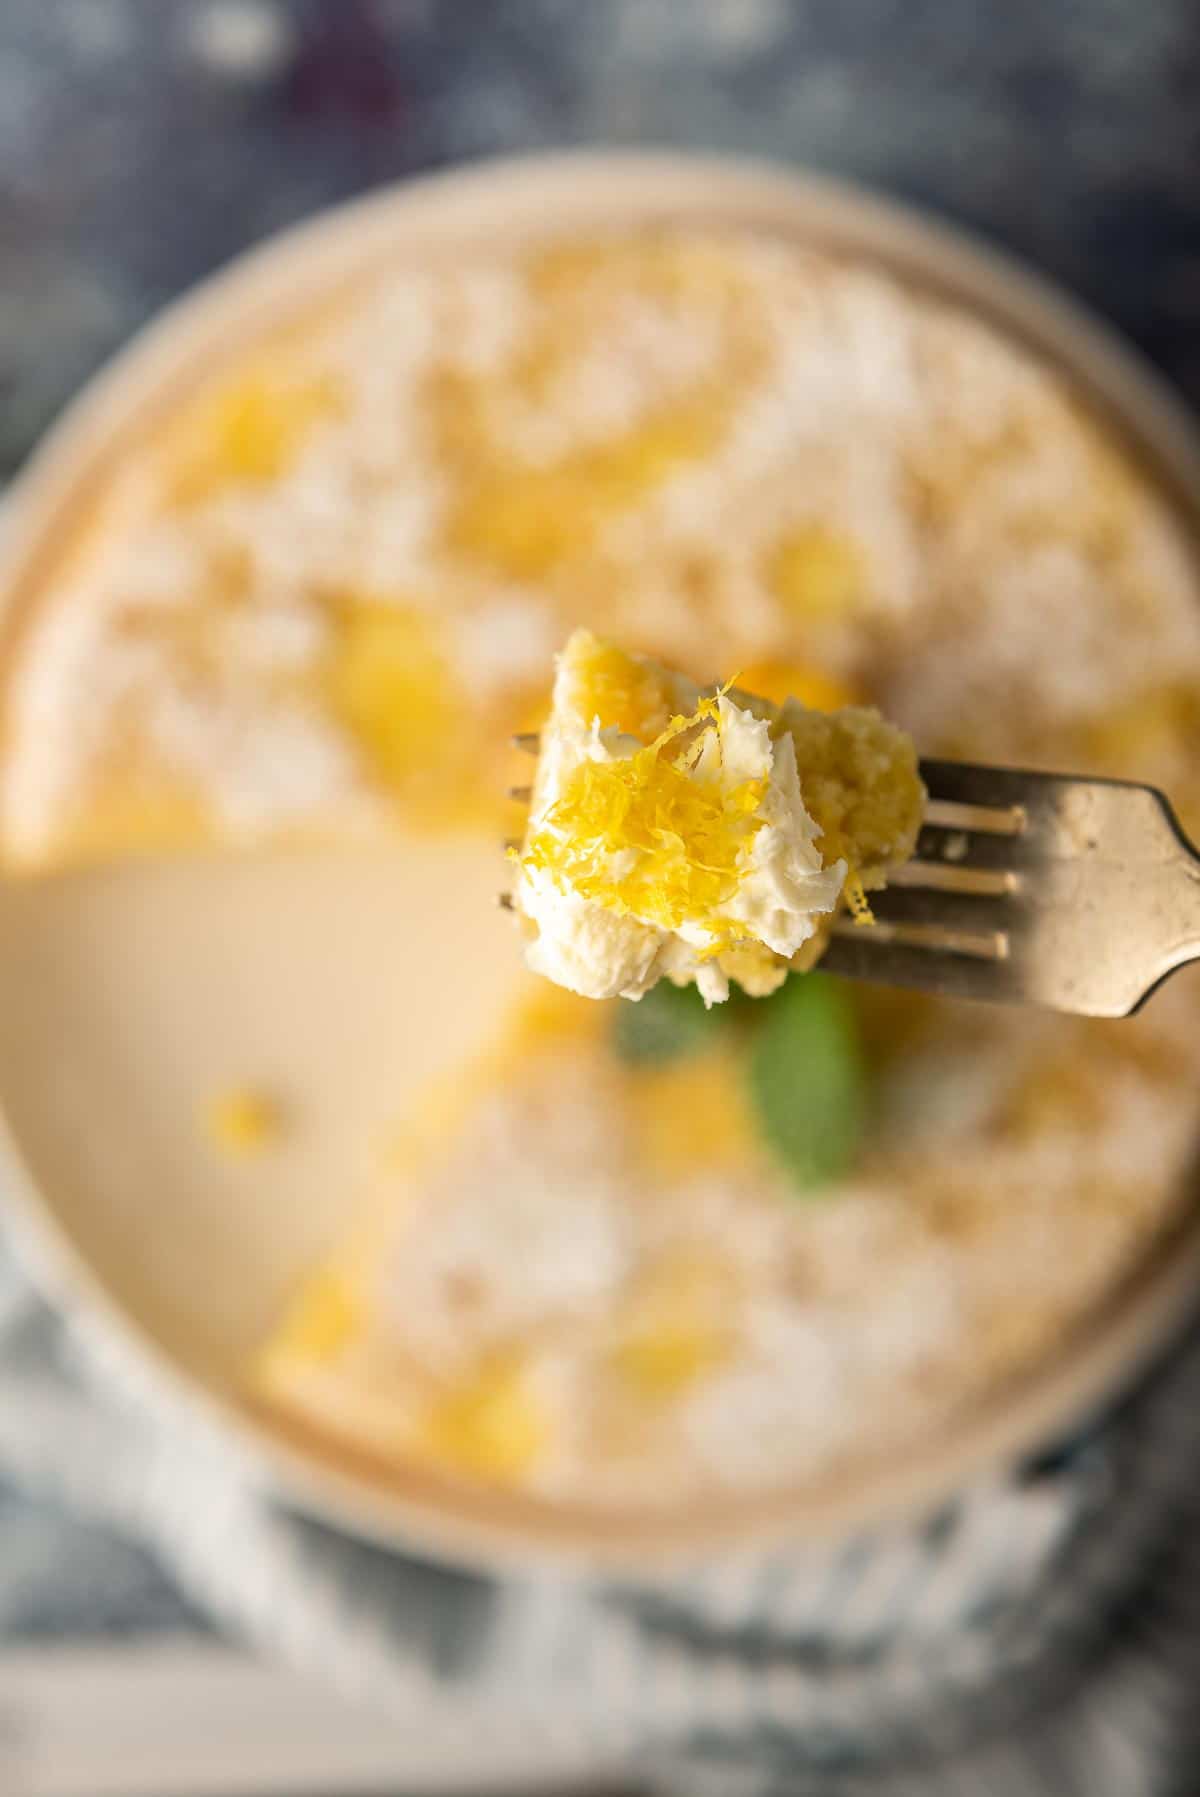 A close up of a bite of the Italian cheesecake with a bit of mascarpone on a fork.